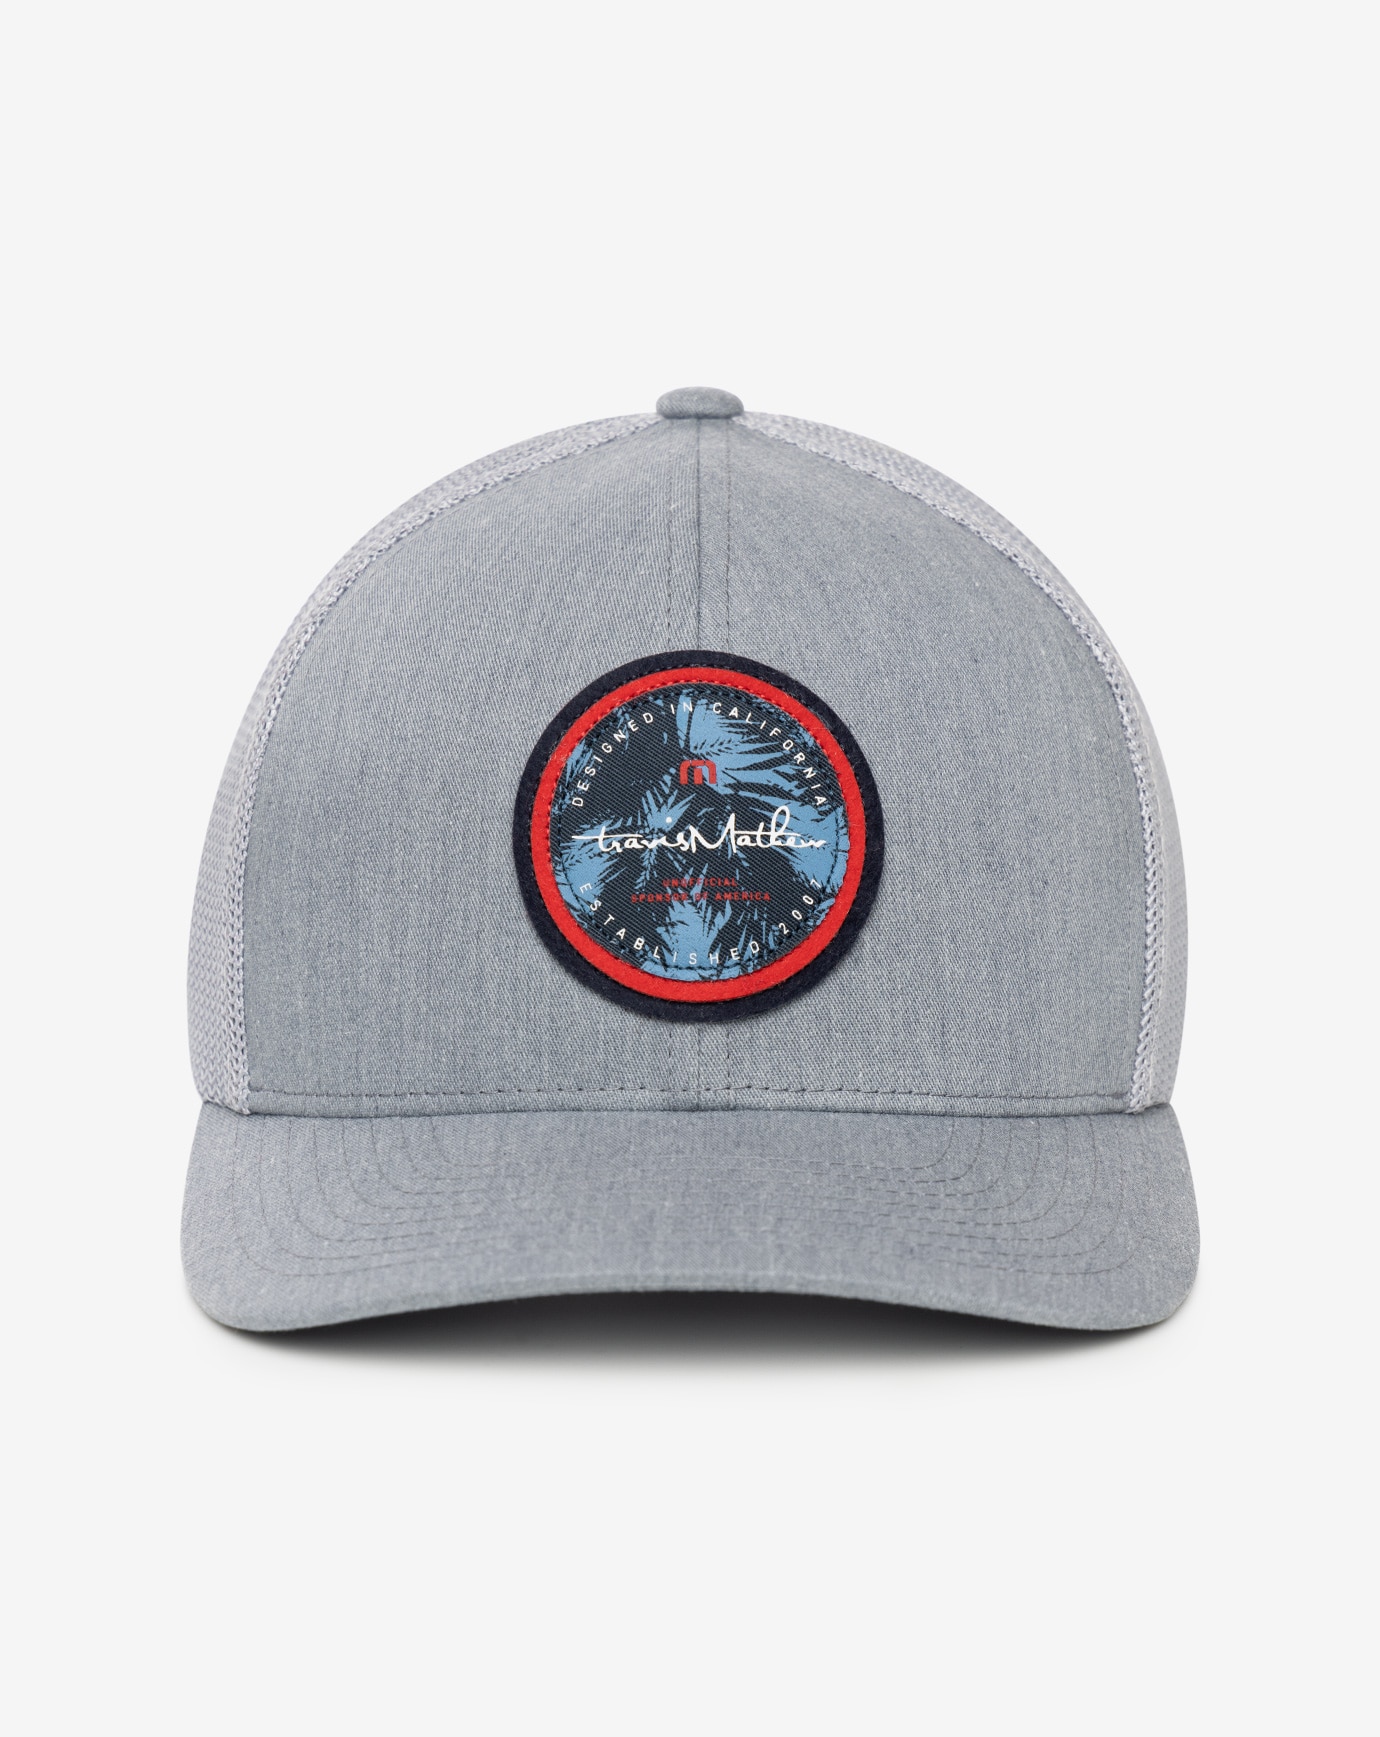 Related Product - IN TM WE TRUST FITTED HAT